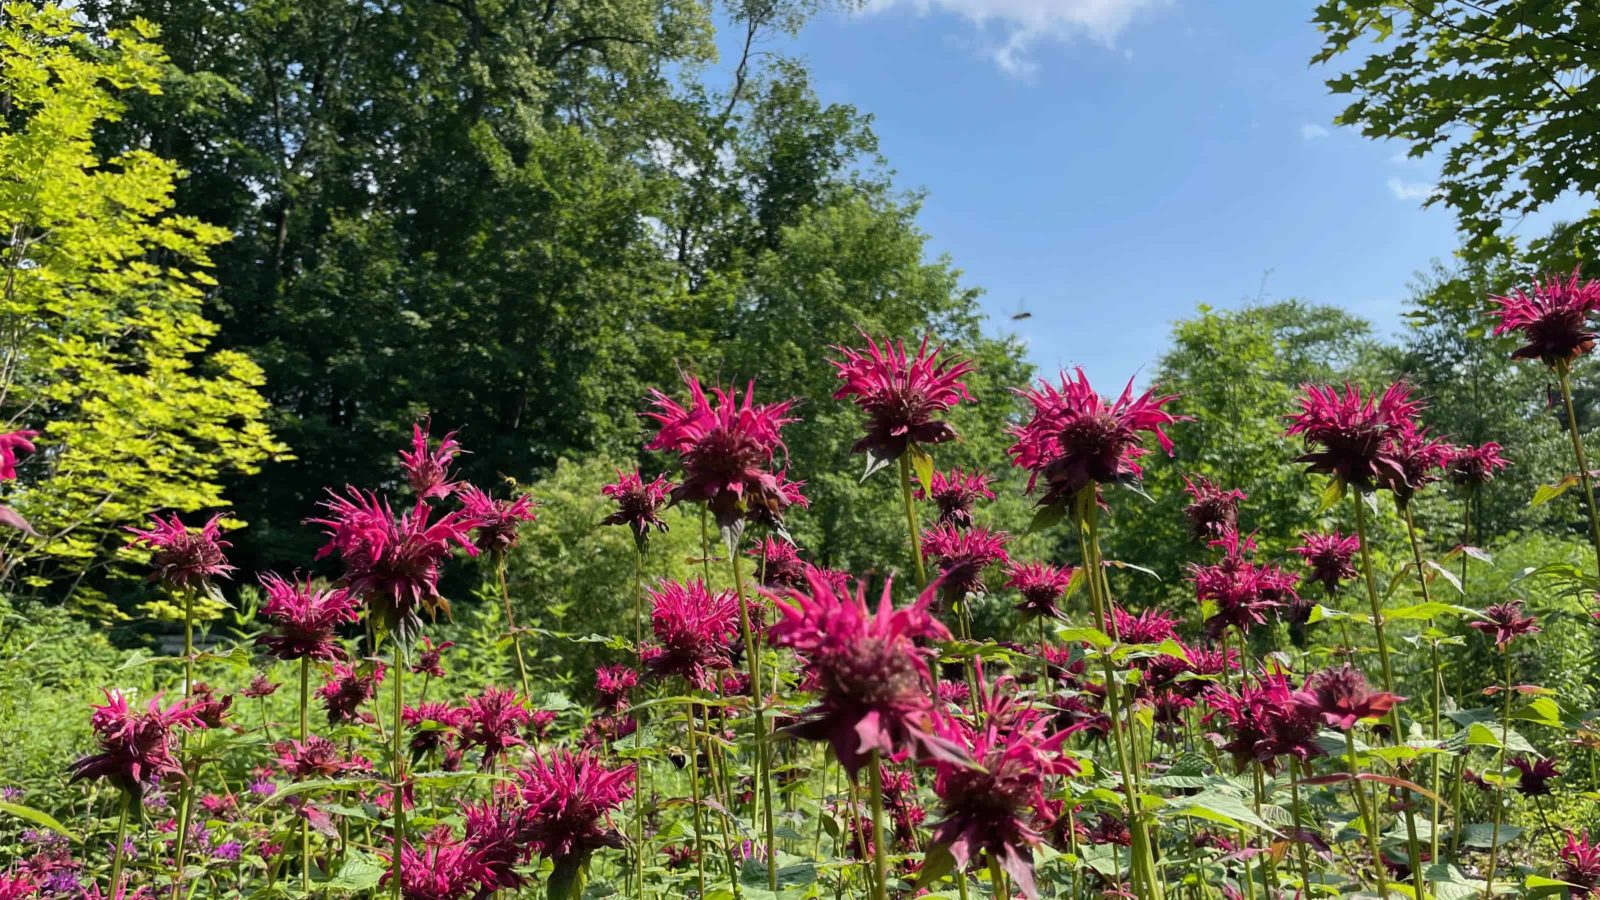 Bee balm blooms vivid purple-red along the wildflower trail above the Bennington Museum.